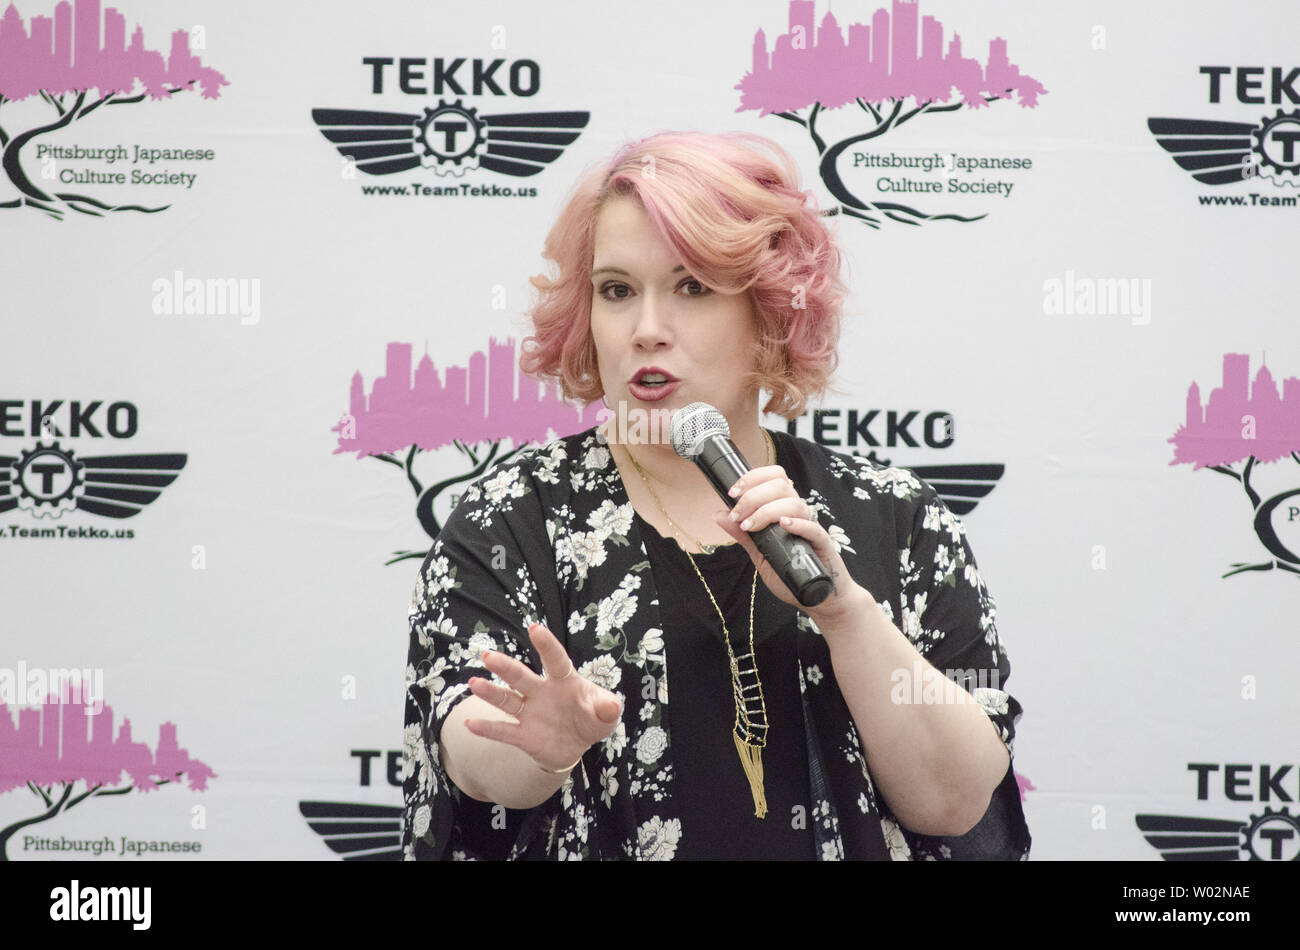 Monica Rial, a voice actor, fields question from the audience at Tekko, a Japanese Pop Culture festival at the David Lawrence Convention Center in Pittsburgh on April 7, 2018.   Photo by Archie Carpenter/UPI Stock Photo